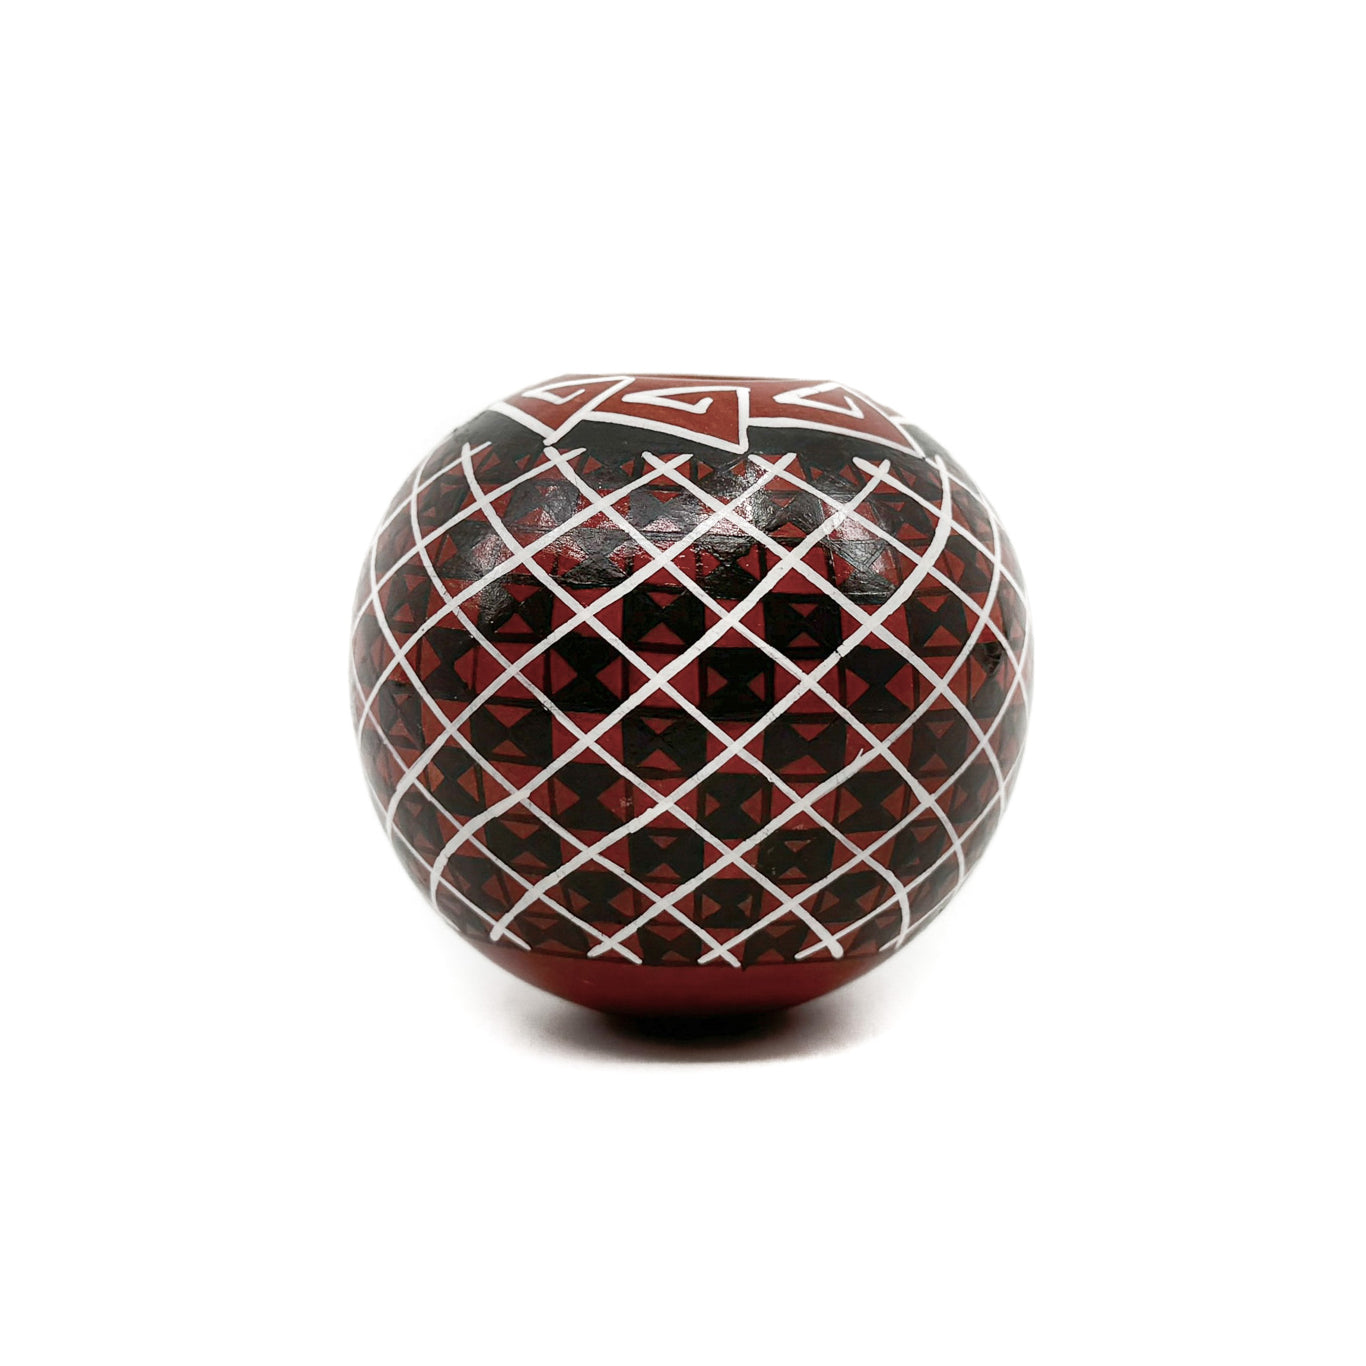 Seed Pot with Geometric Designs